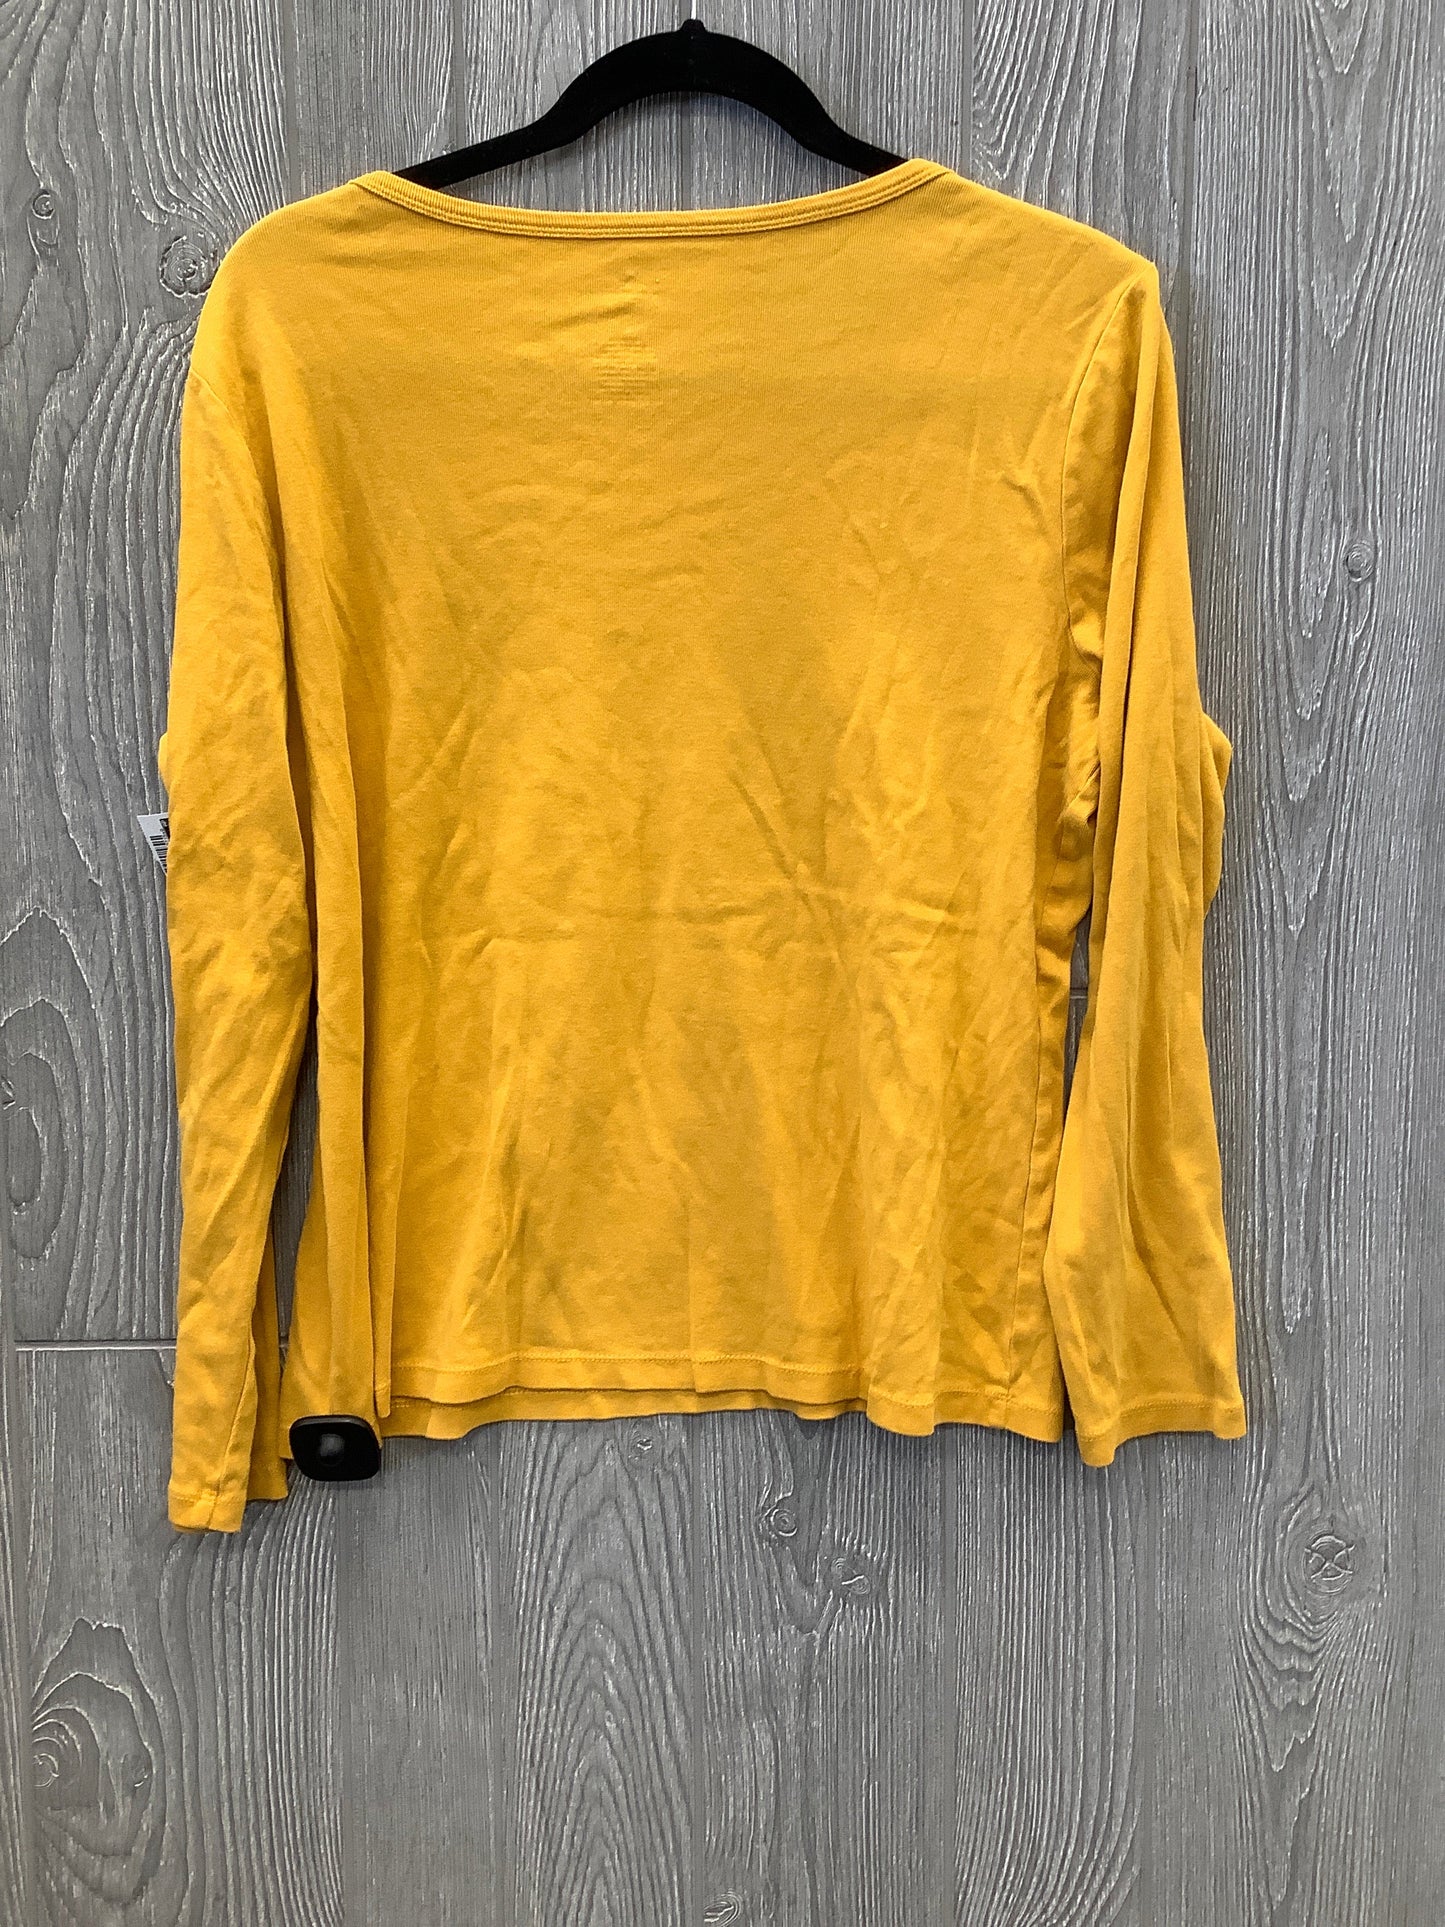 Yellow Top Long Sleeve St Johns Bay, Size L